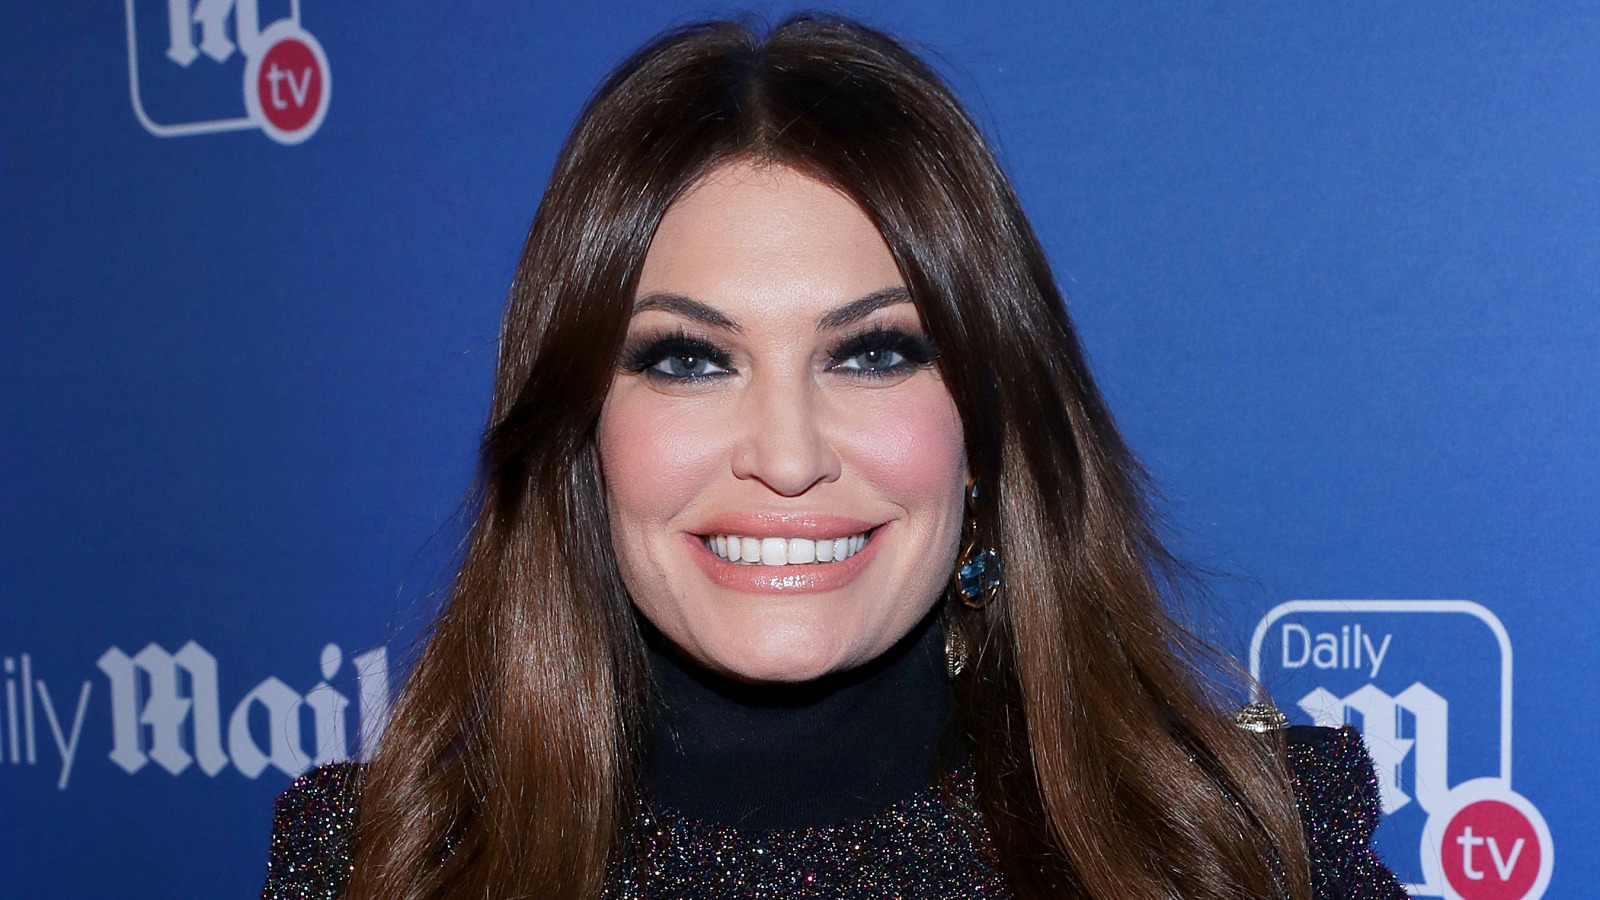 Kimberly Guilfoyle Has Dramatically Changed Over The Years.